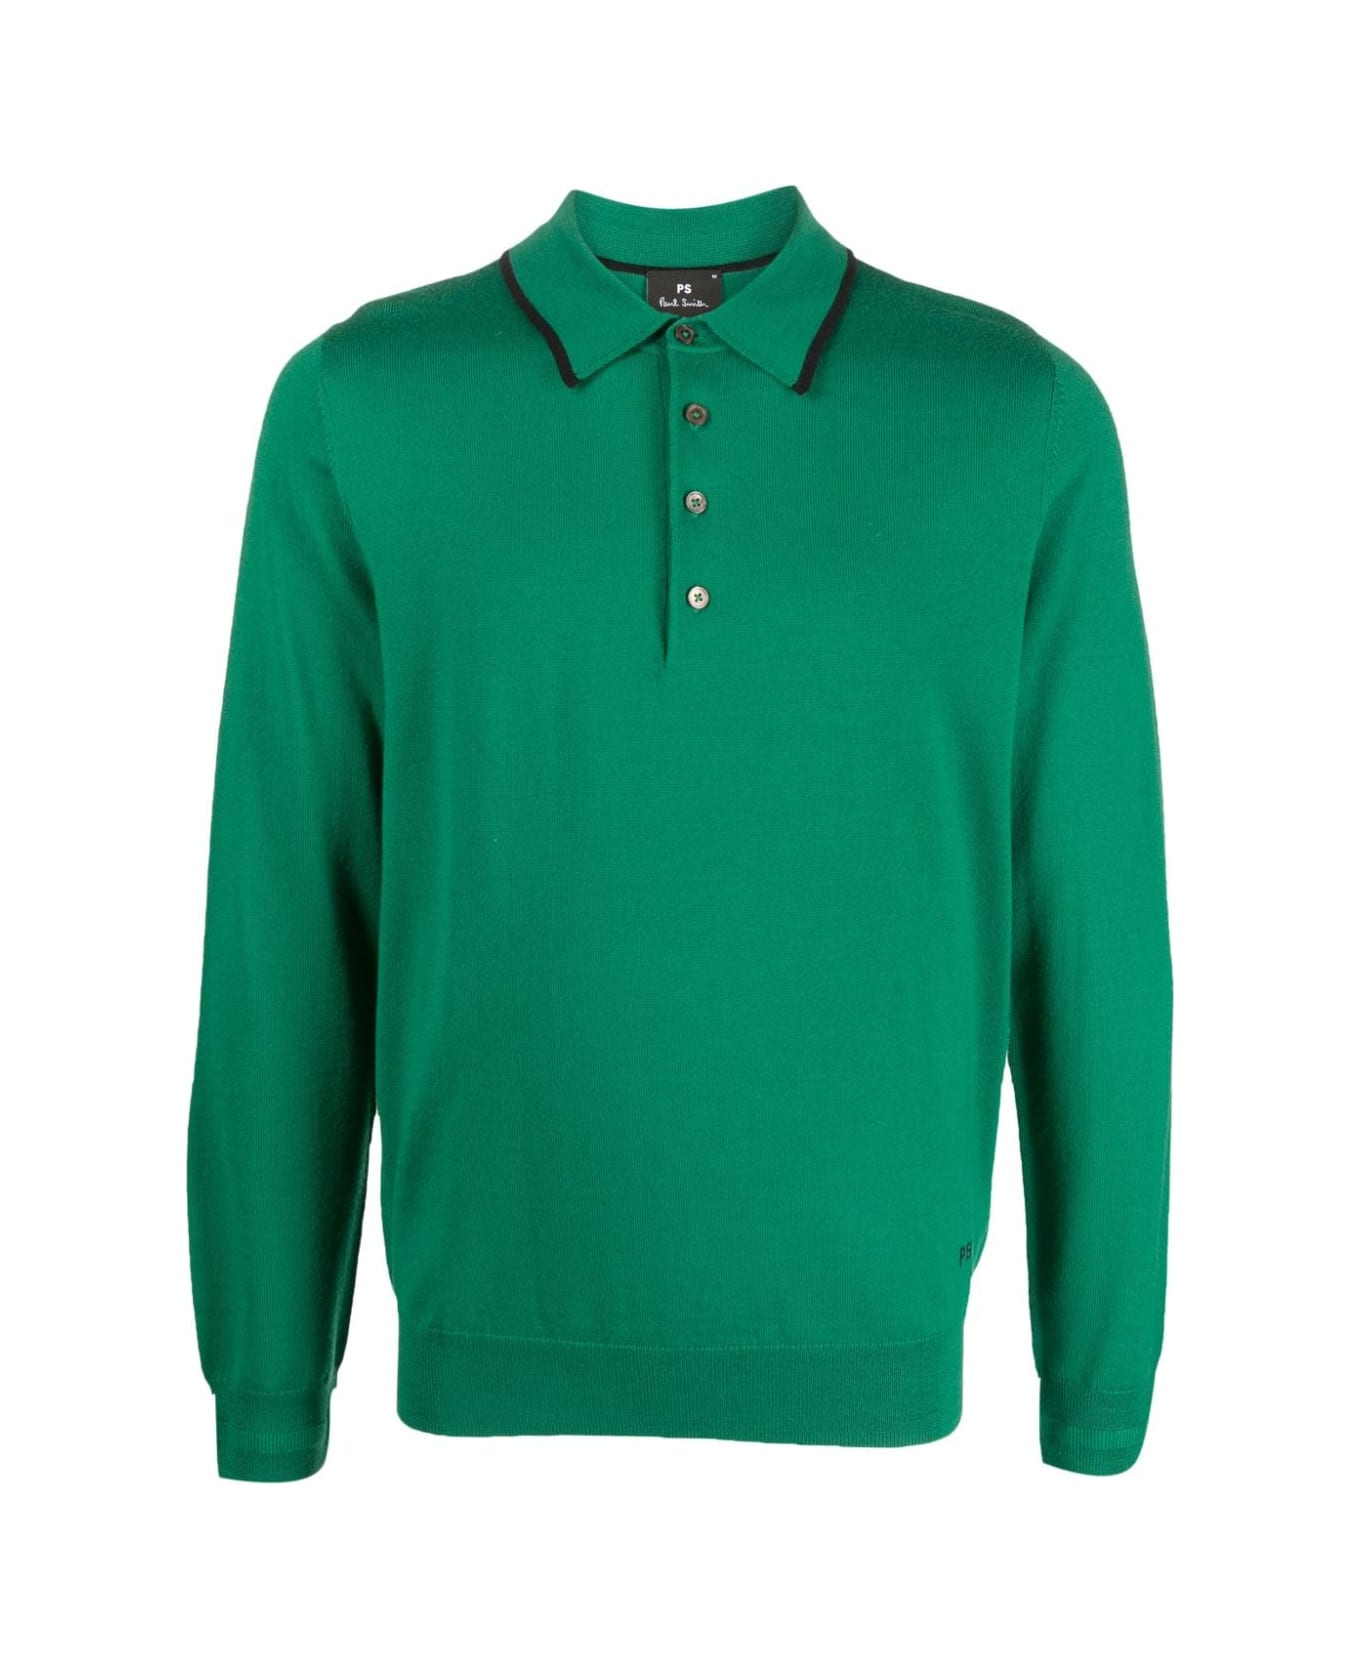 PS by Paul Smith Mens Sweater Long Sleeves Polo - Emerald Green